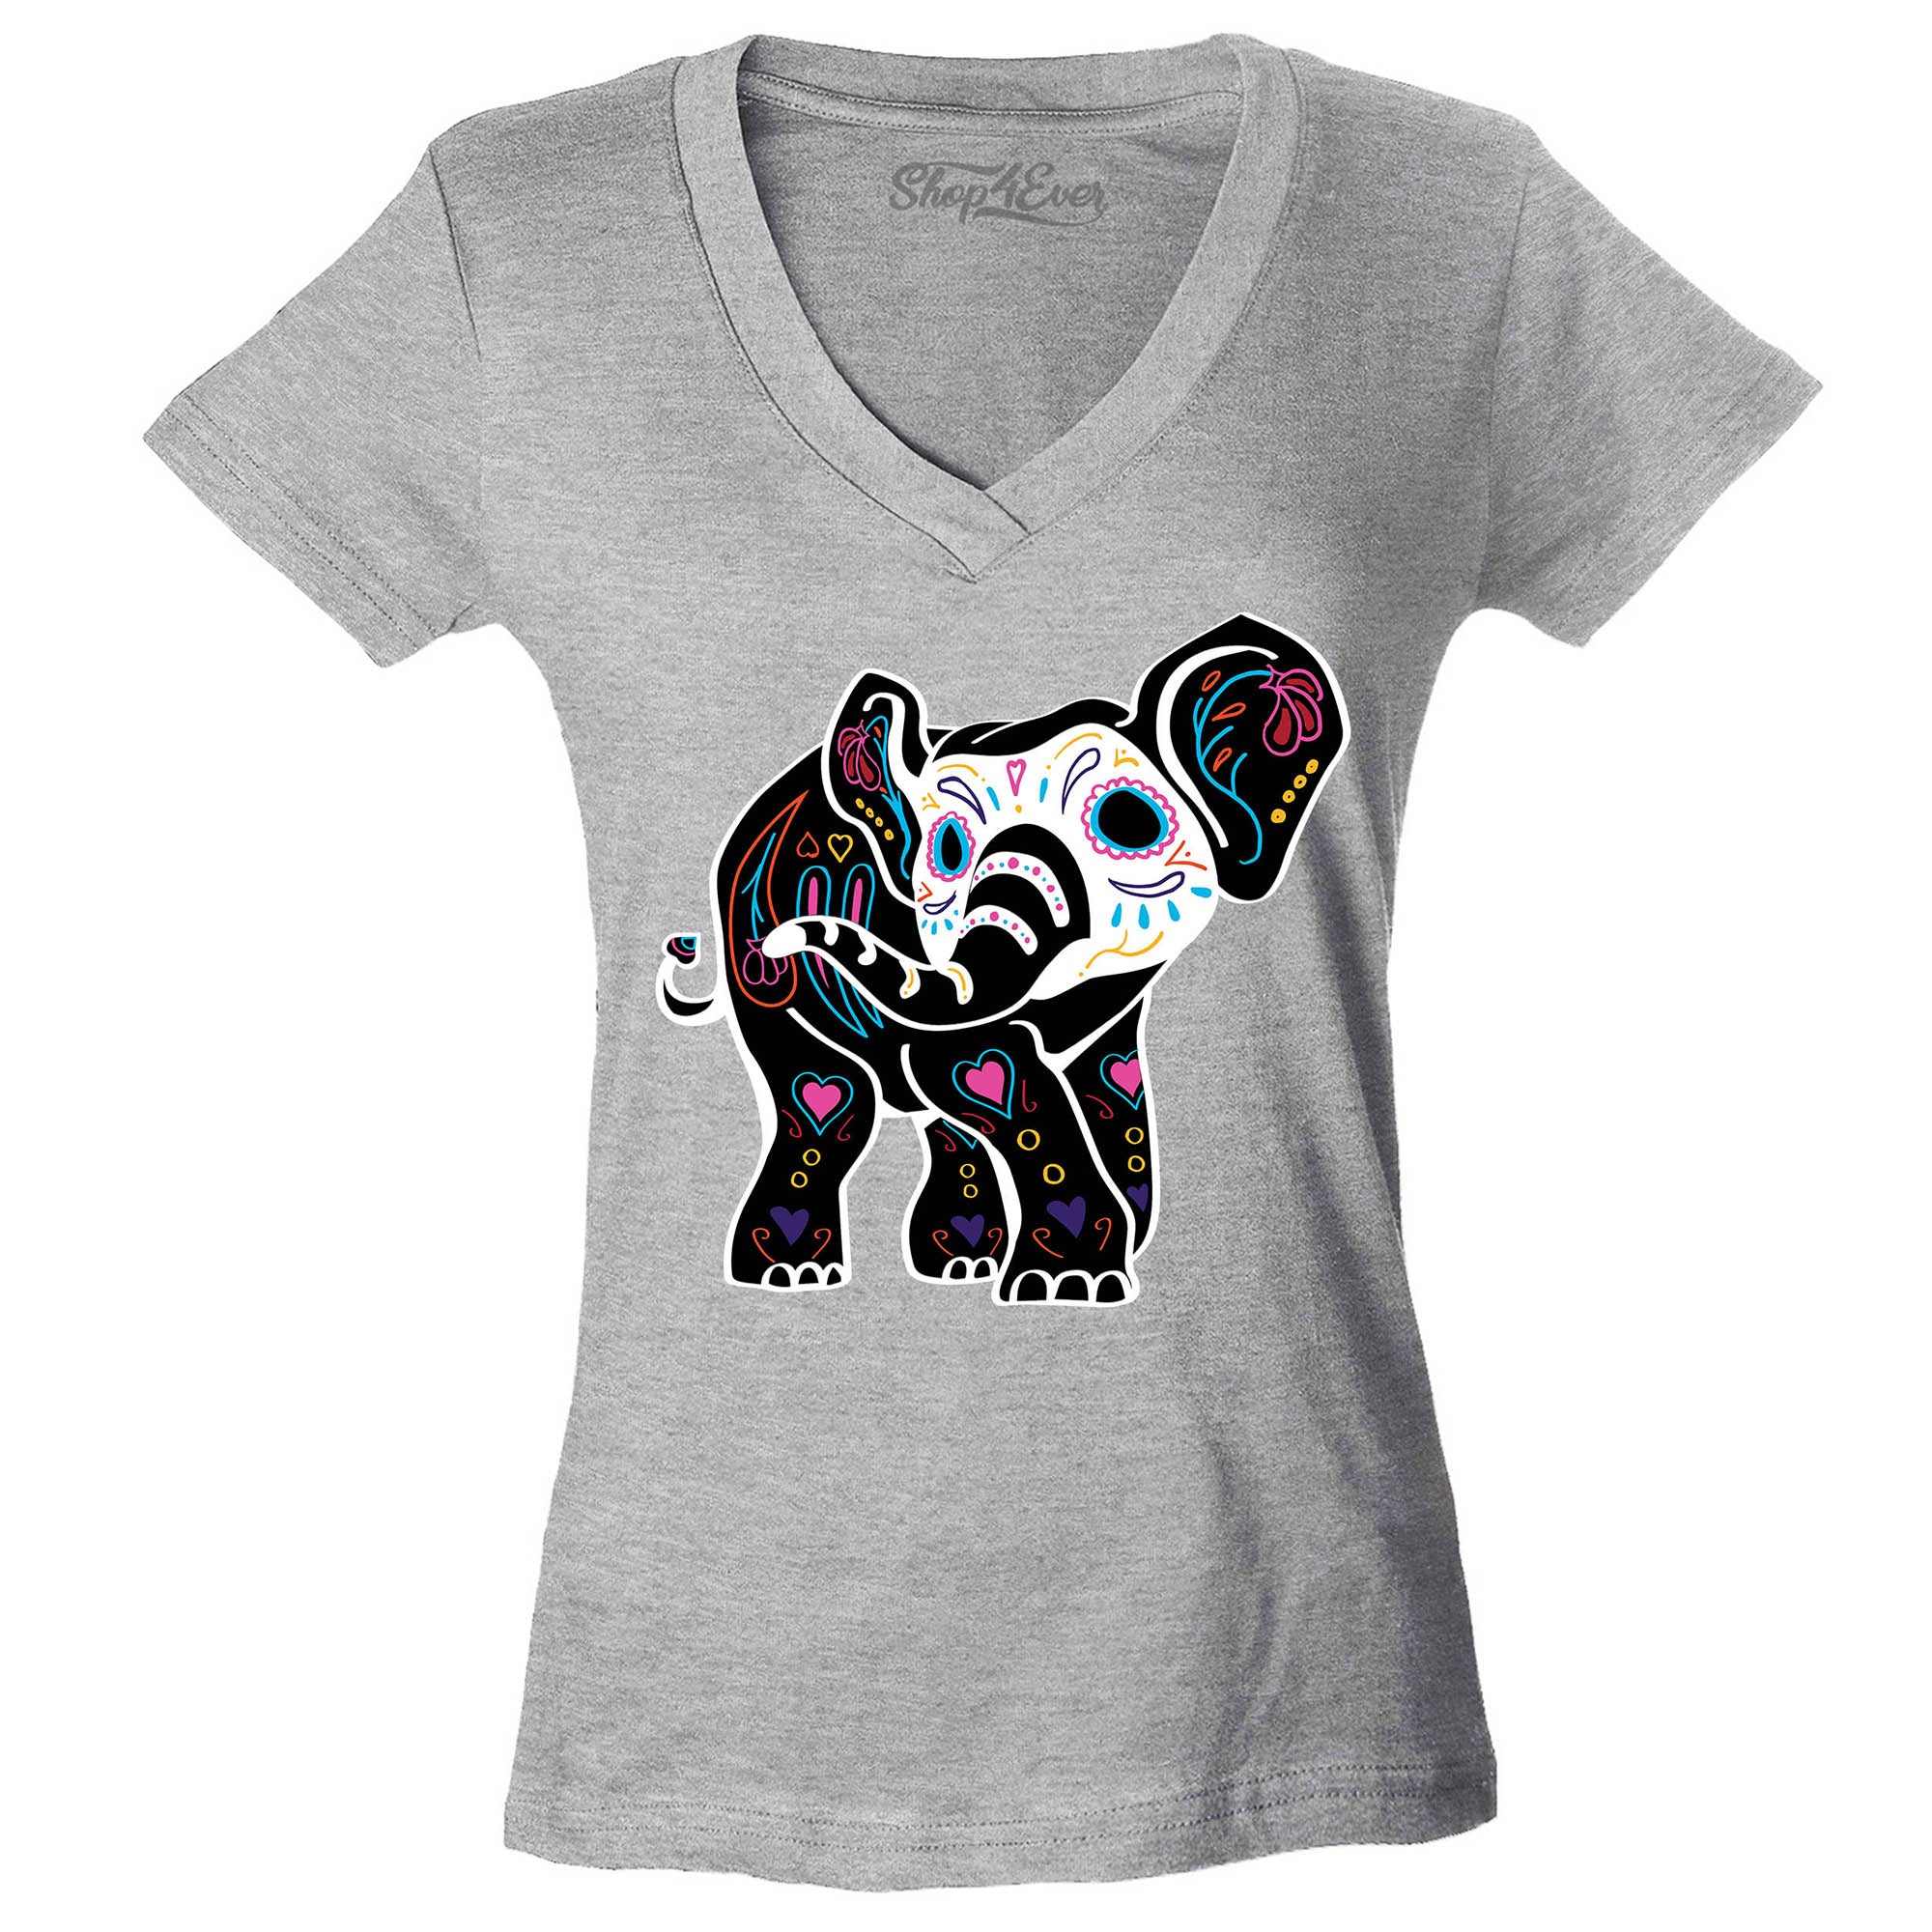 Day of The Dead Sugar Elephant Women's V-Neck T-Shirt Slim Fit